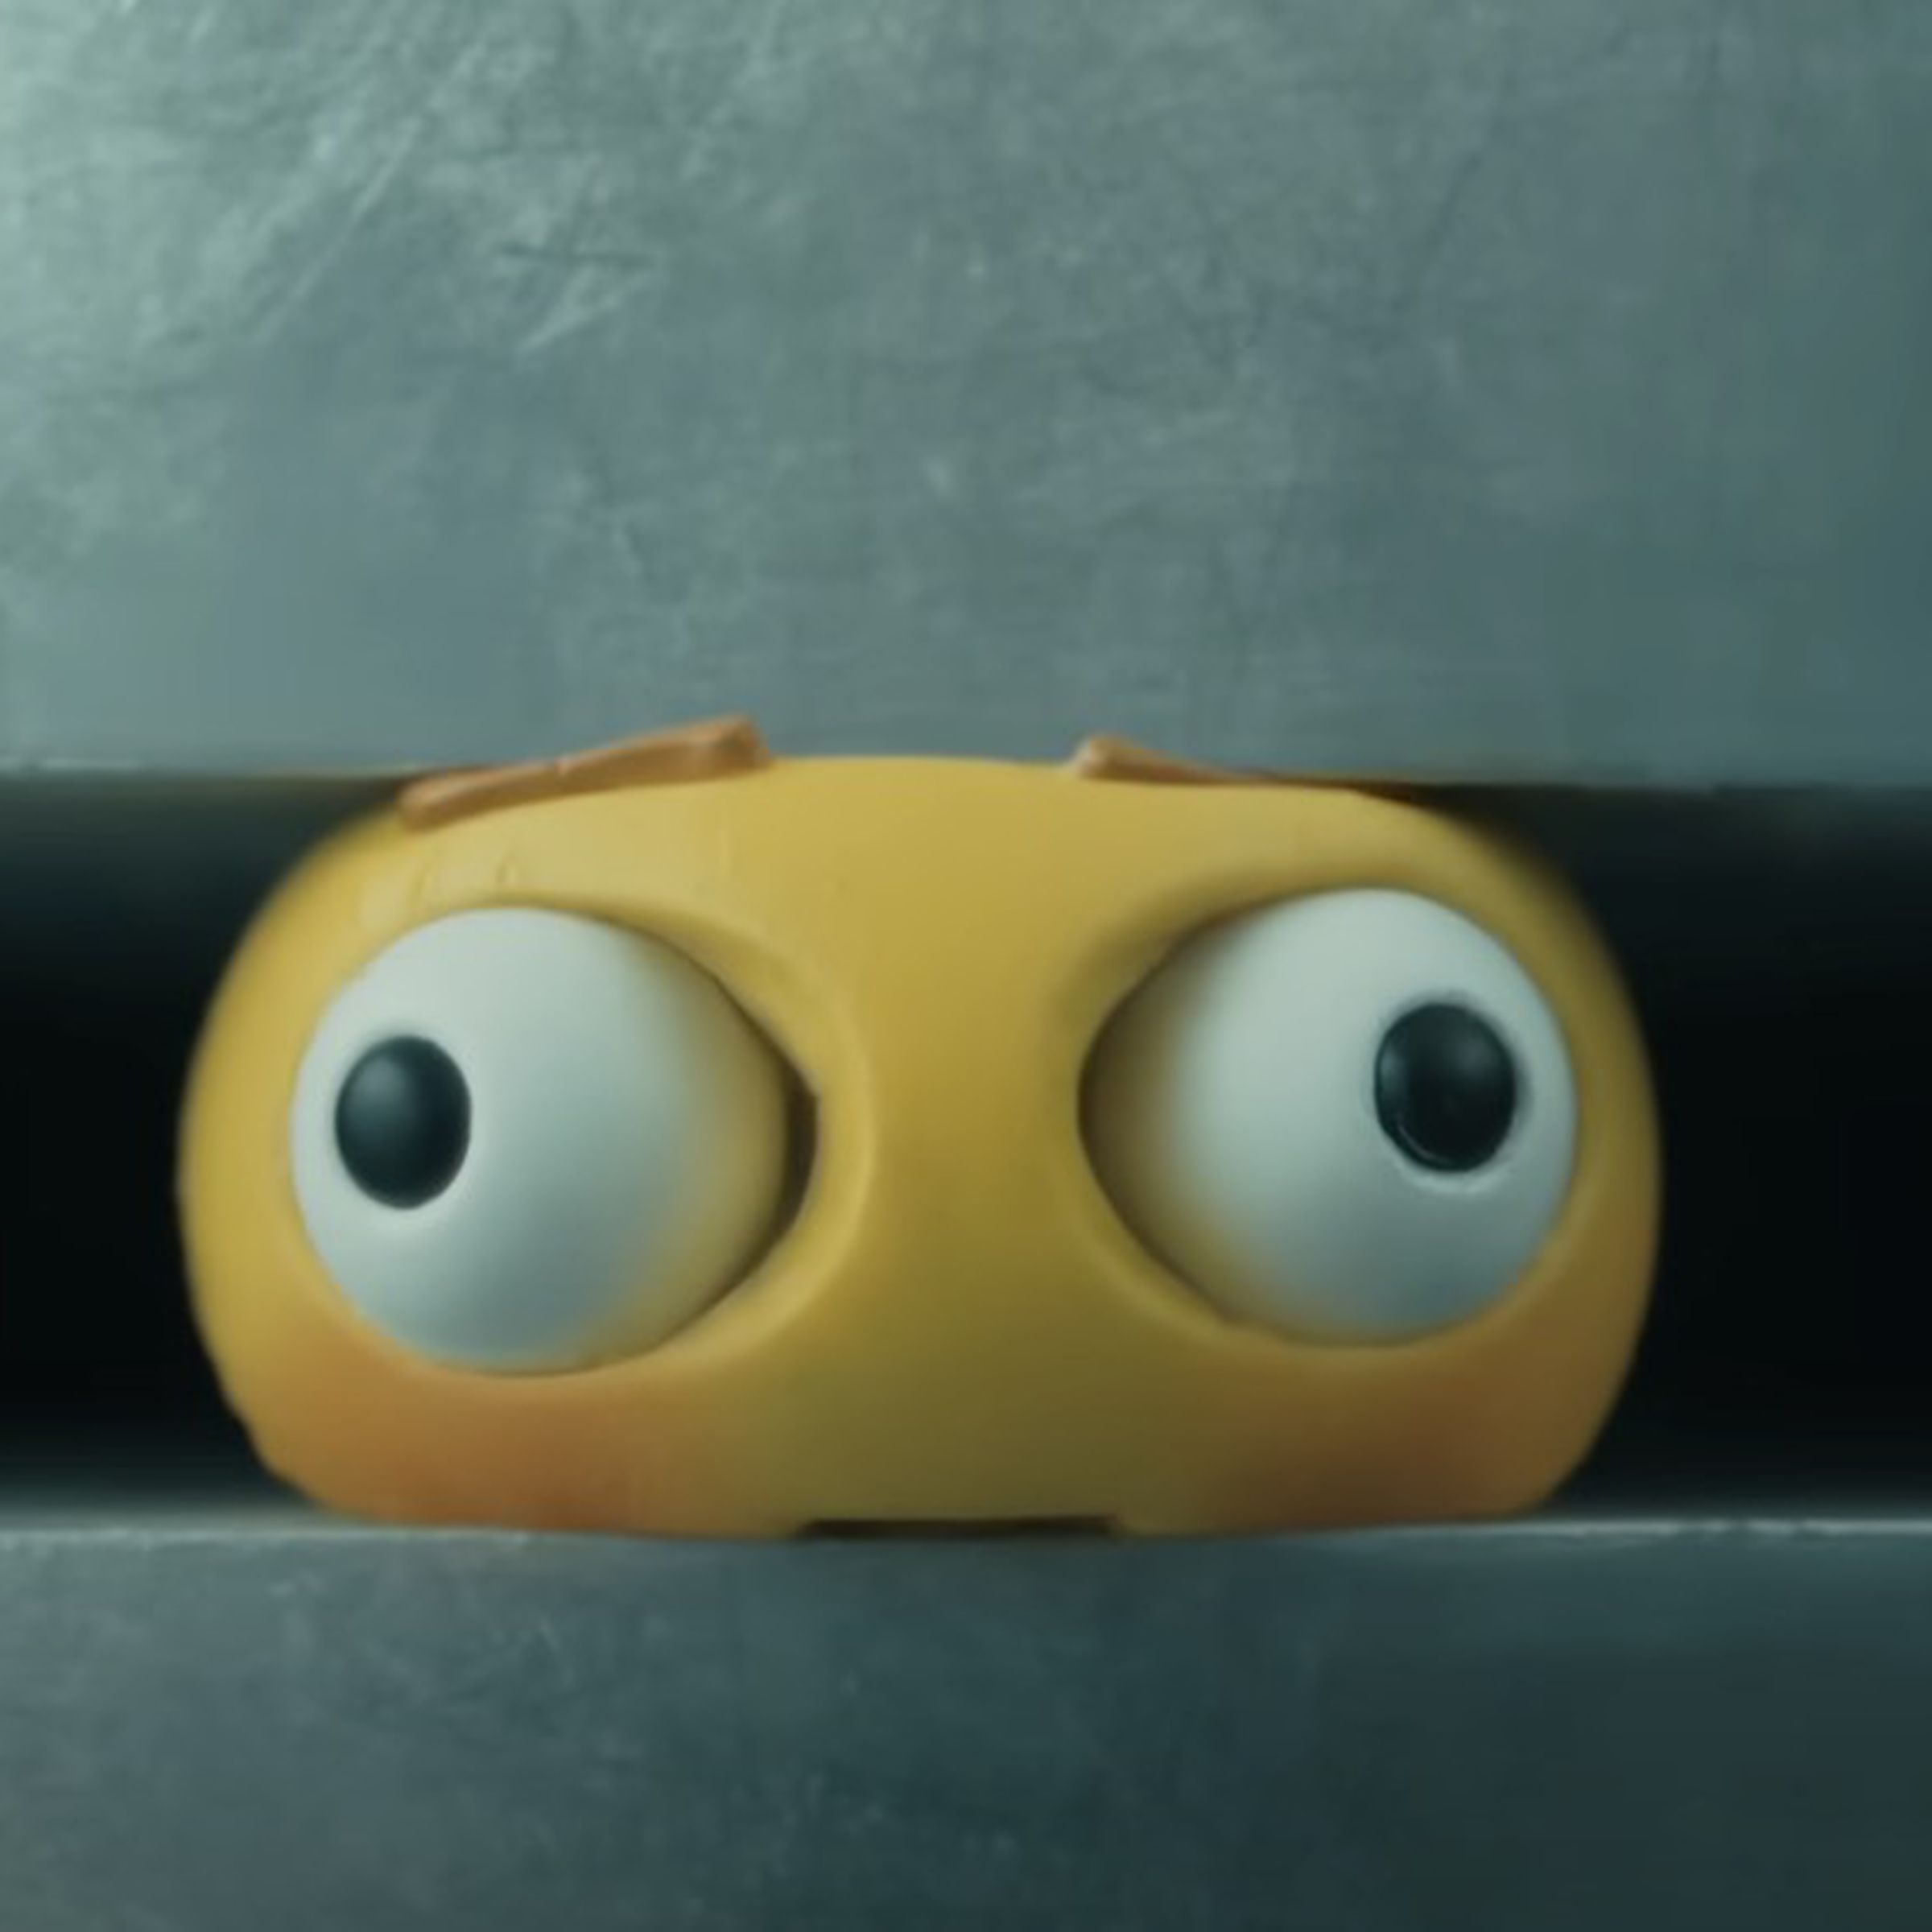 An image of an emoji crushed in a giant hydraulic press.